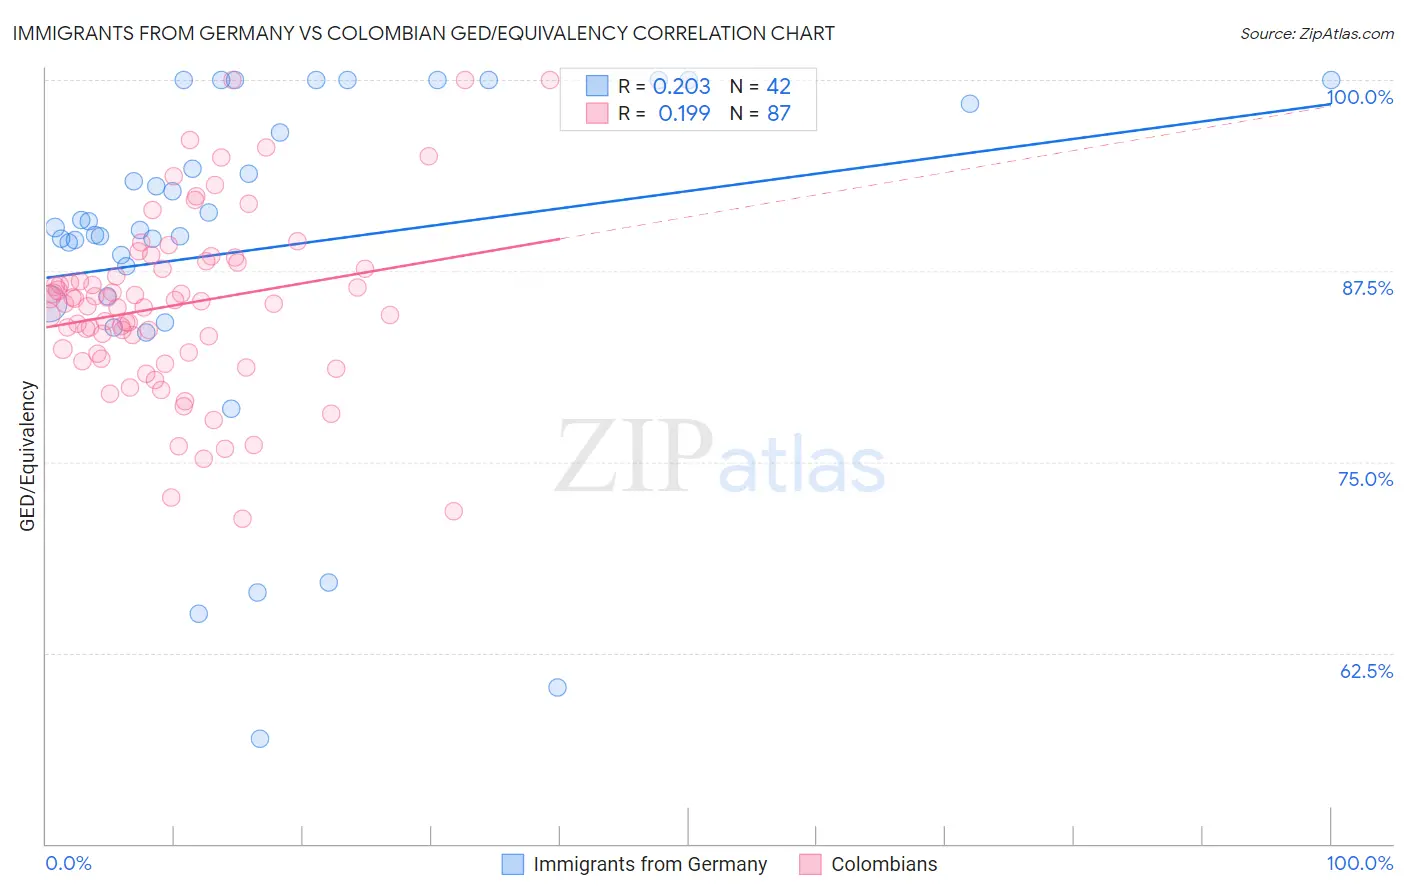 Immigrants from Germany vs Colombian GED/Equivalency